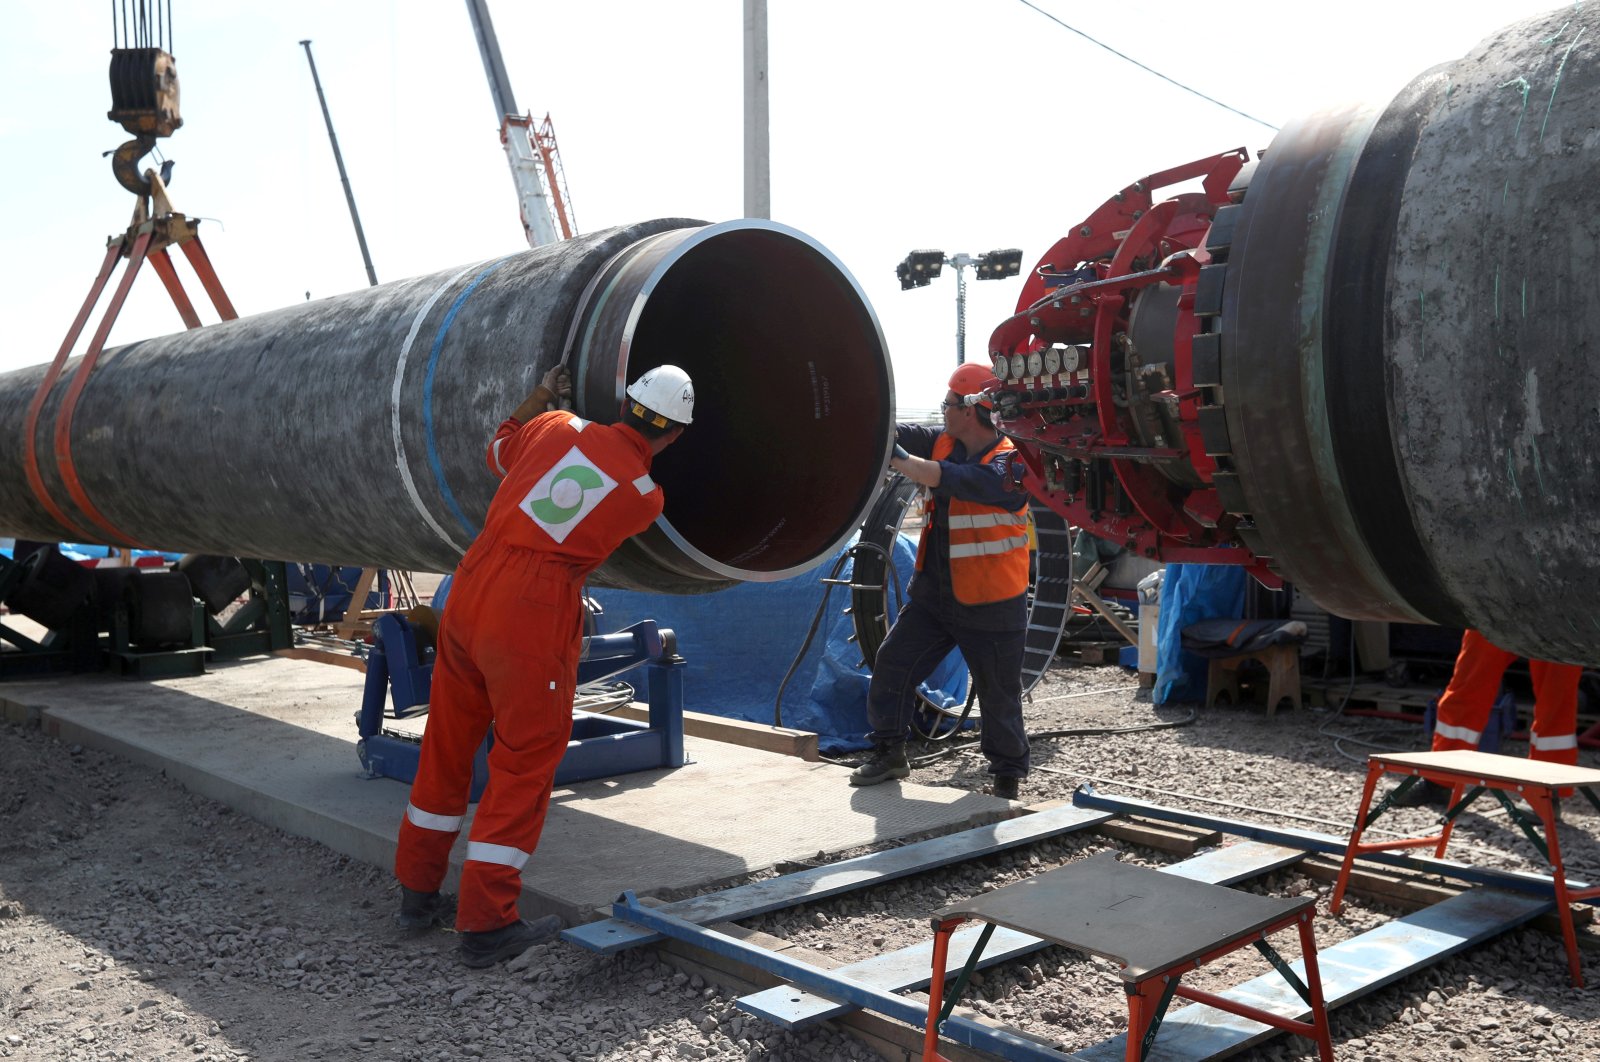 Workers are seen at the construction site of the Nord Stream 2 gas pipeline, near the town of Kingisepp, Leningrad region, Russia, June 5, 2019. (Reuters Photo)